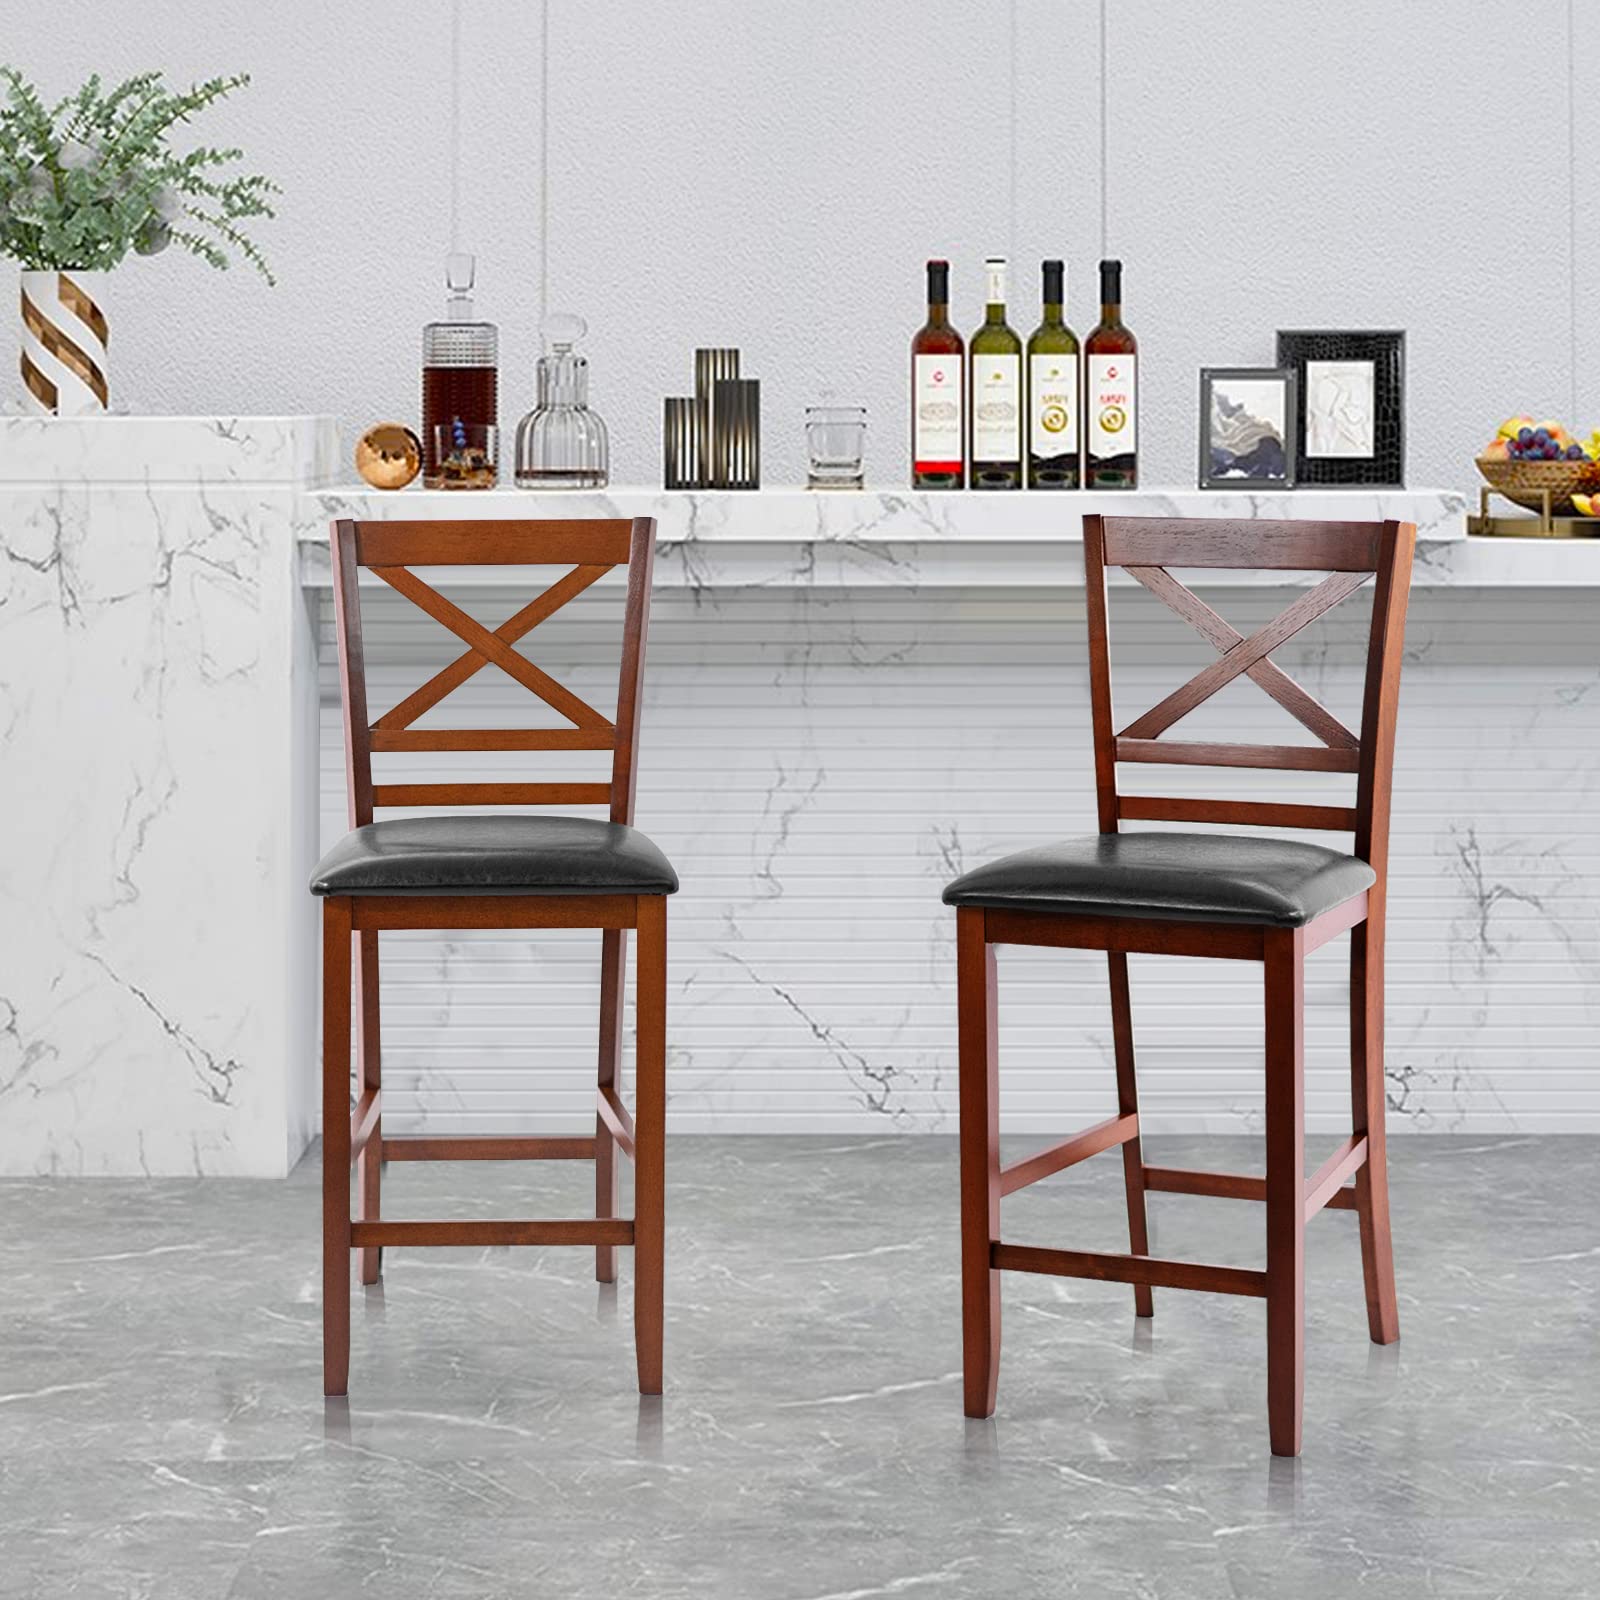 Giantex Modern 25” Counter Height Dining Pub Stools with X-Shaped Backrest, Soft Cushion & Durable PU Seat